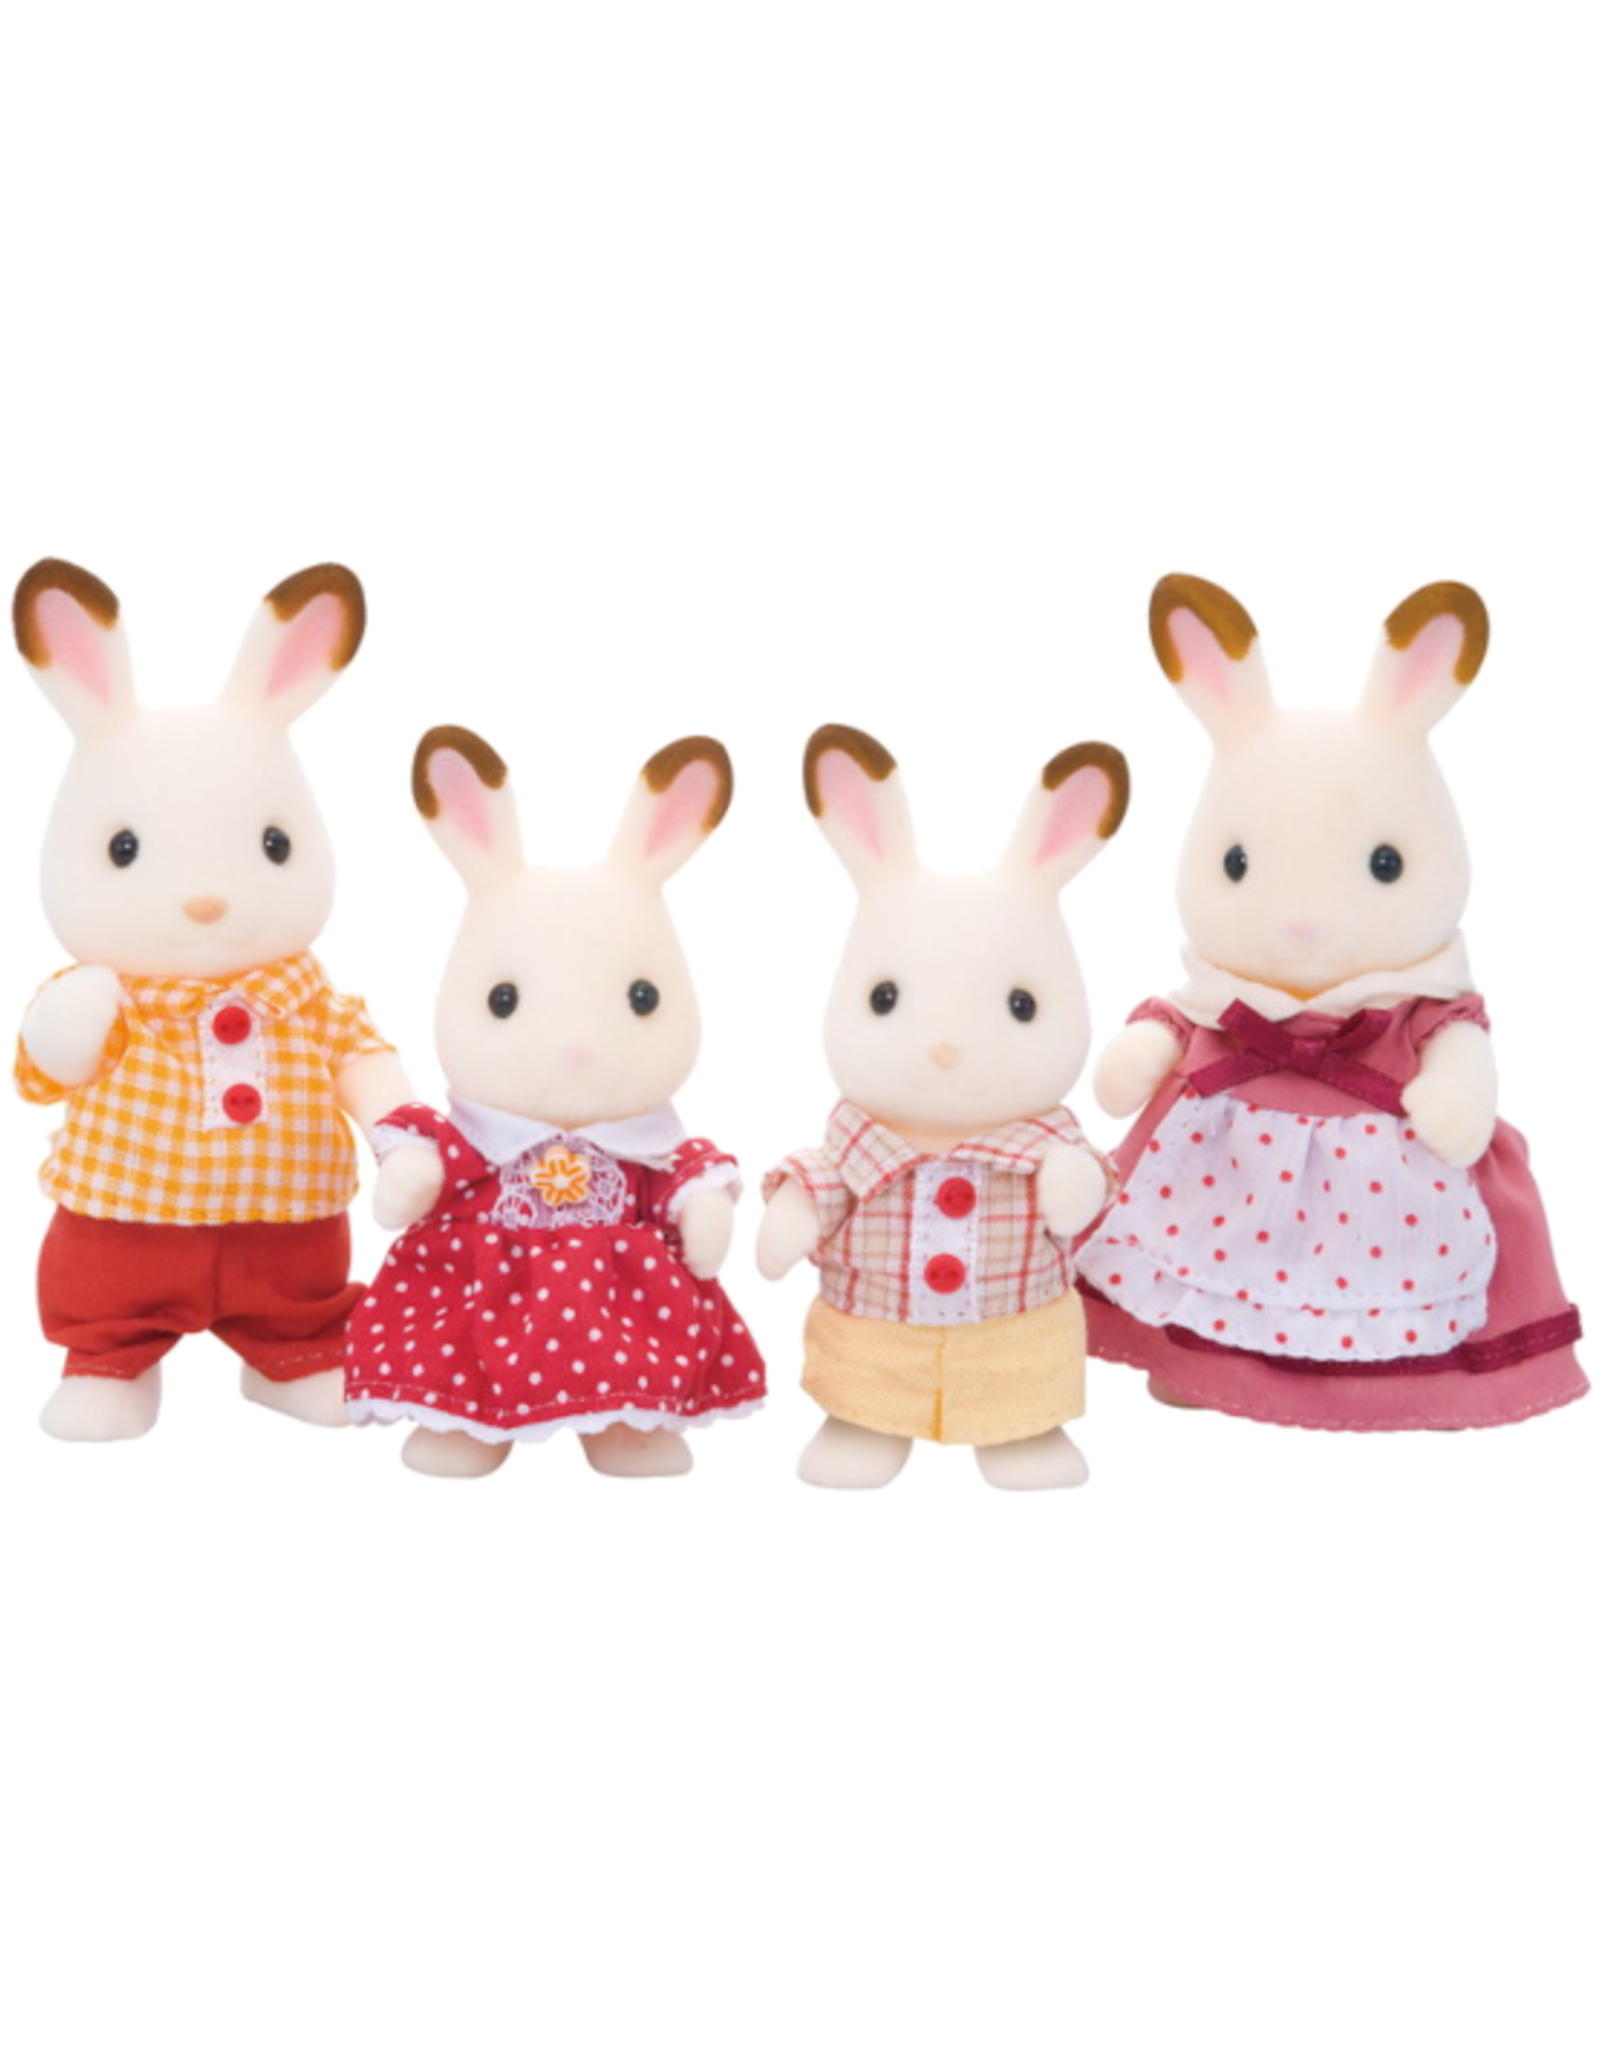 Calico Critters Calico Critters - Hopscotch Rabbit Family